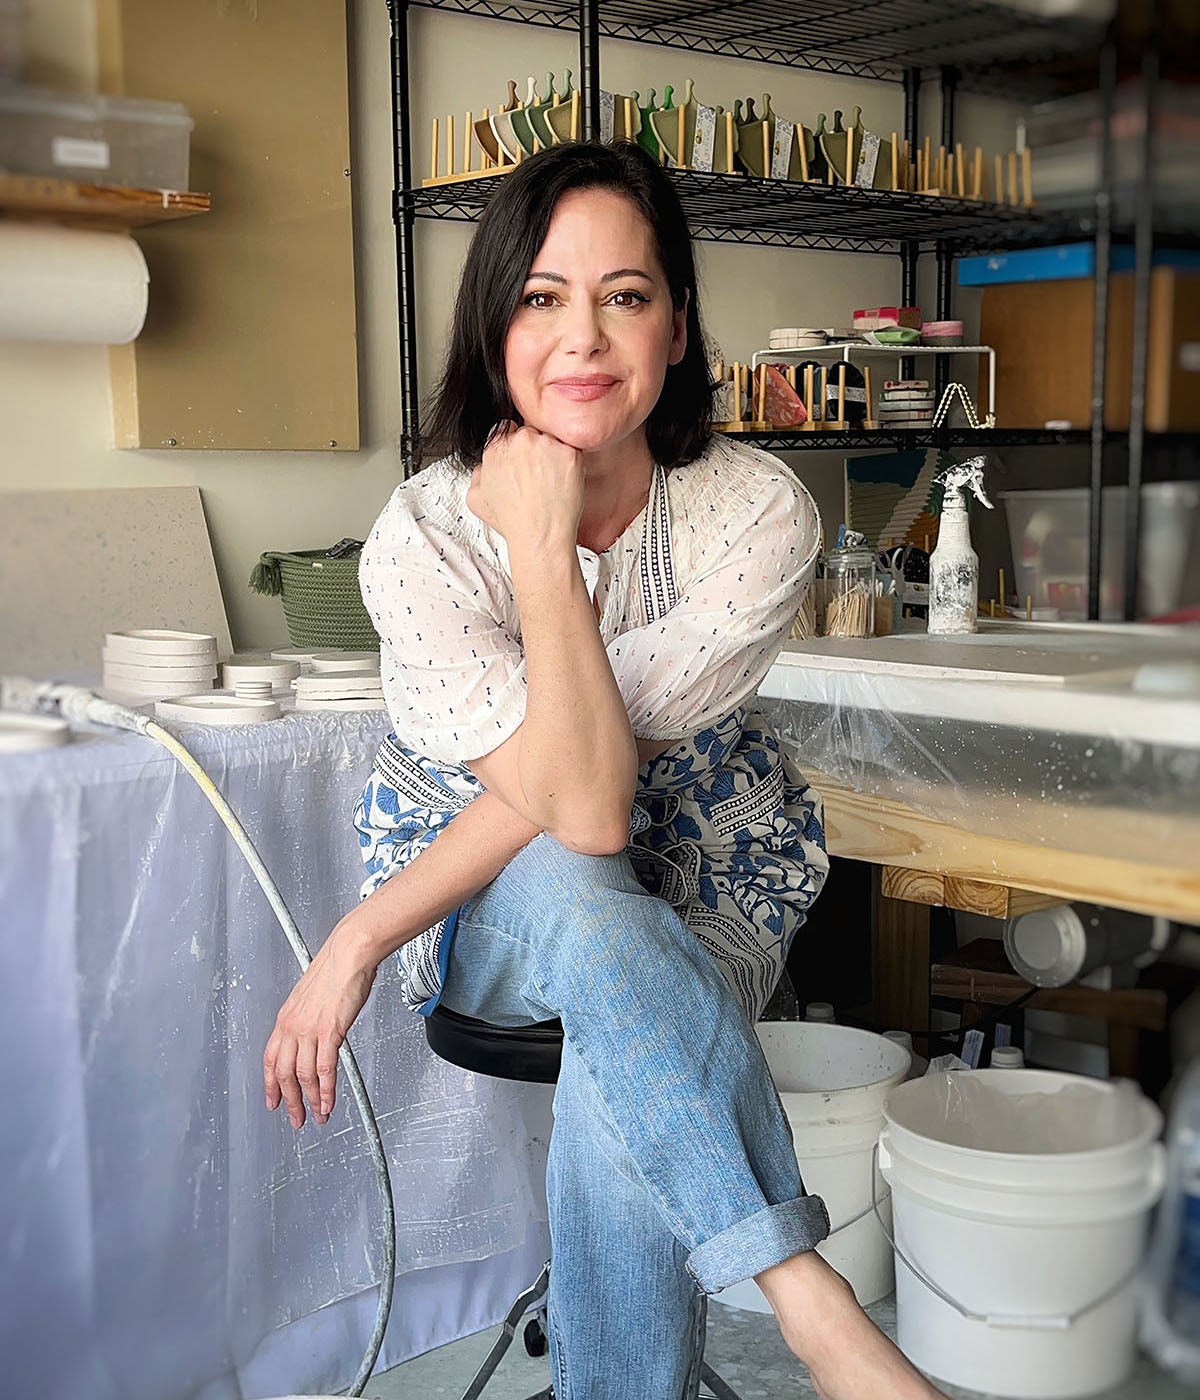 Photo of the artist in her studio with blue jeans and a summer top on. She has a French bob haircut, is barefoot with her head resting on her chin. Her housewares materials are around her as she looks like she is working on her terrazzo housewares..